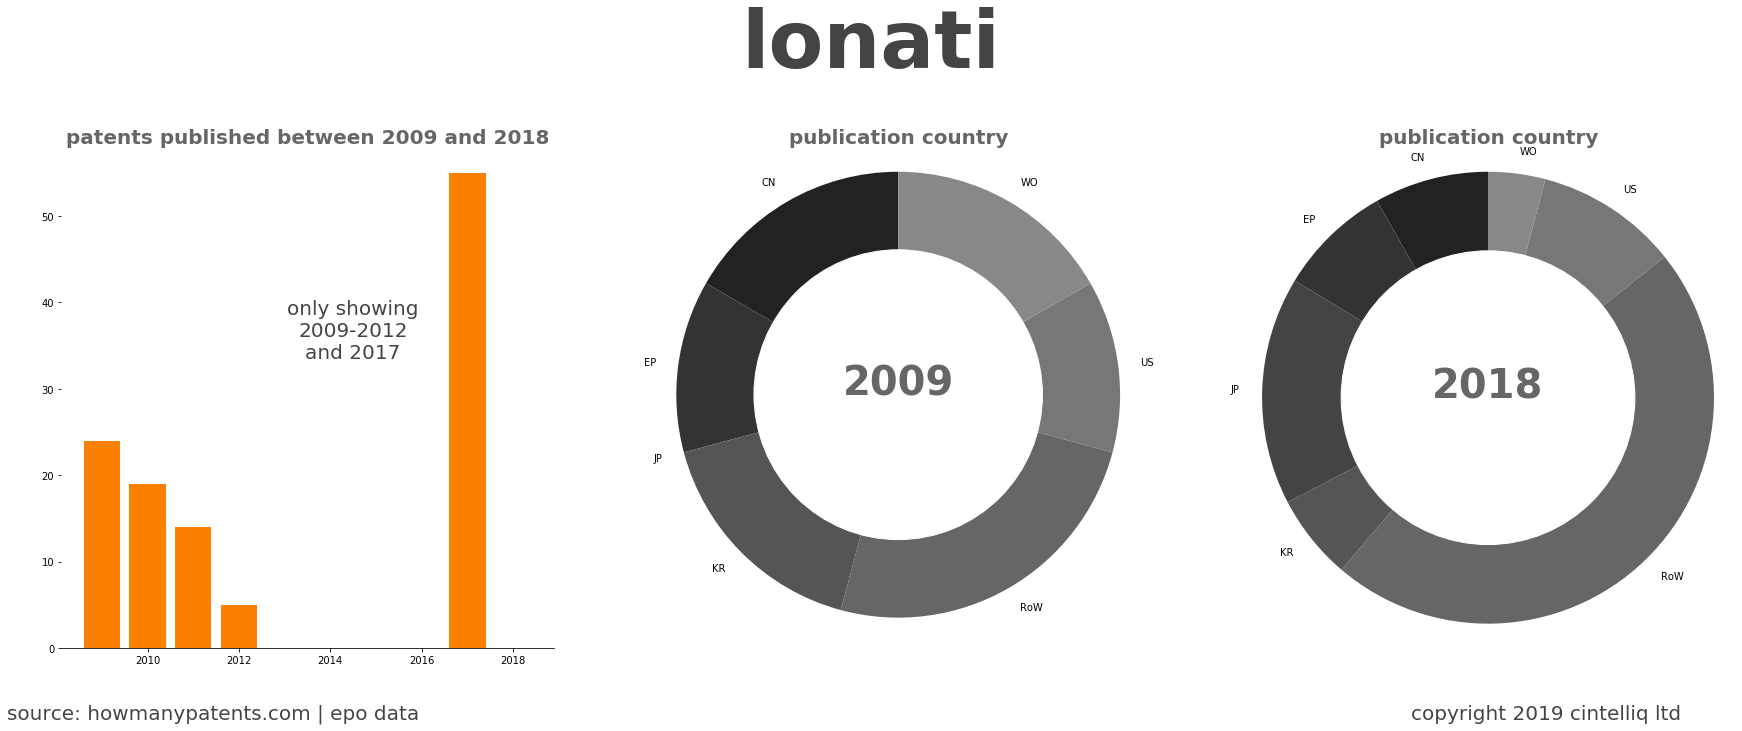 summary of patents for Lonati